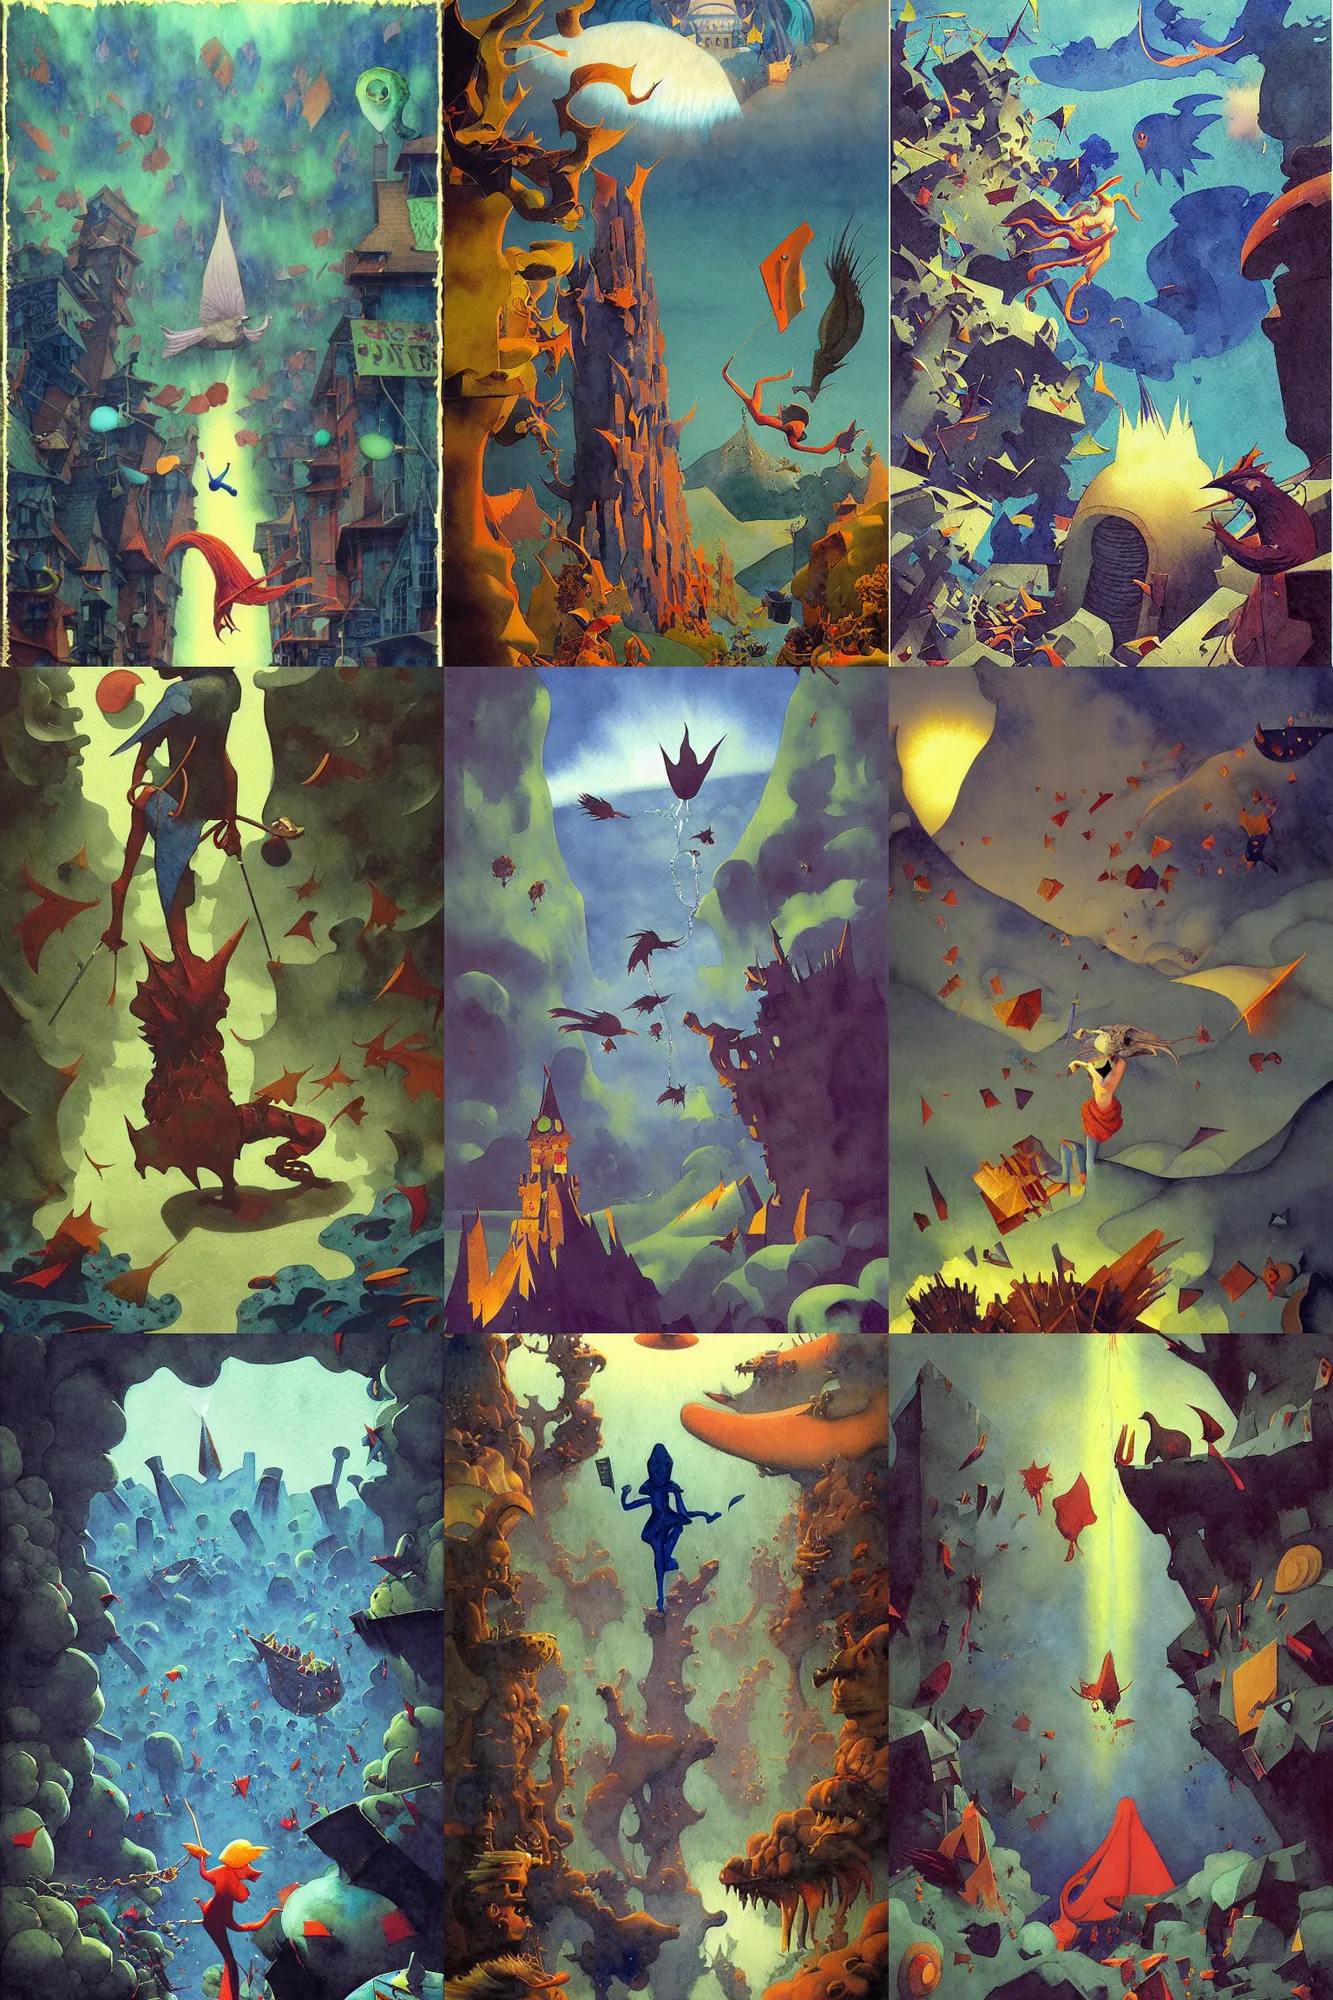 Prompt: dixit card, strange place, giant, spiked club, spikes, birds, fish and chips, focal point, character transforming, dark fantasy, intricate, orthographic, amazing composition, colorful watercolor, by ruan jia, by maxfield parrish, by shaun tan, by nc wyeth, by michael whelan, by escher, illustration, gravity rush, volumetric, blue, green